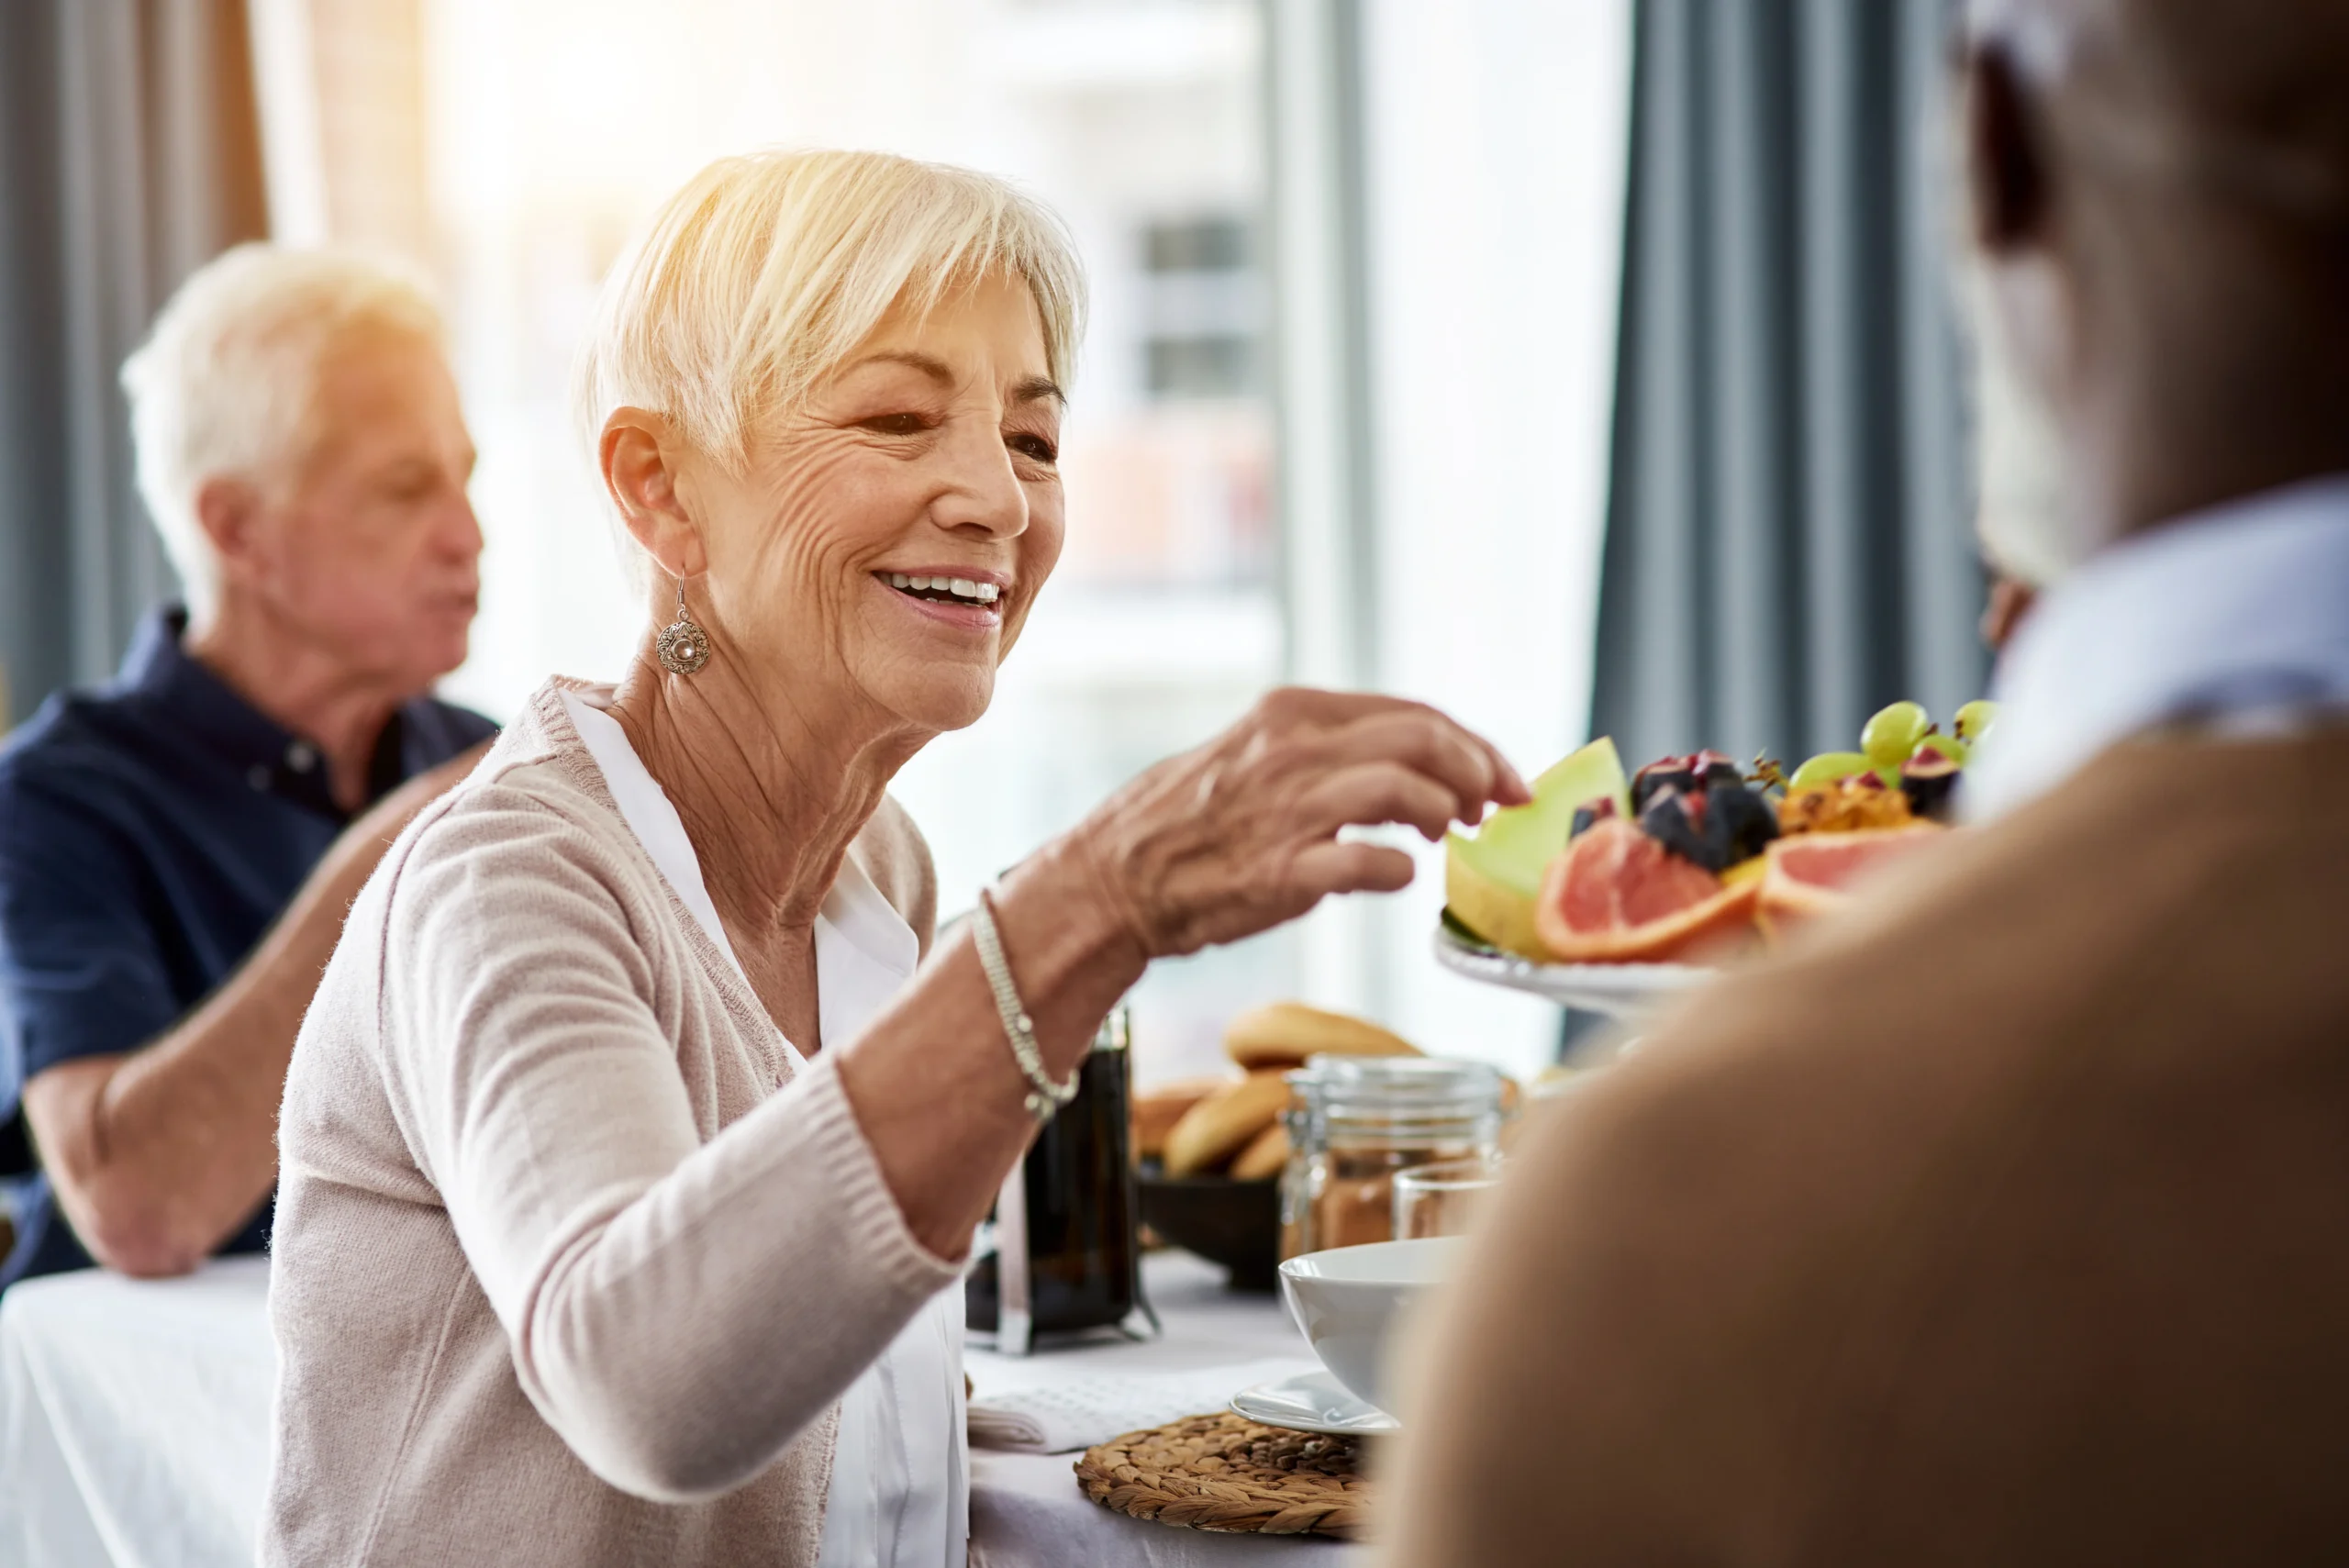 Common Nutrition Concerns for the Elderly: How Nutritional Needs Change as We Age